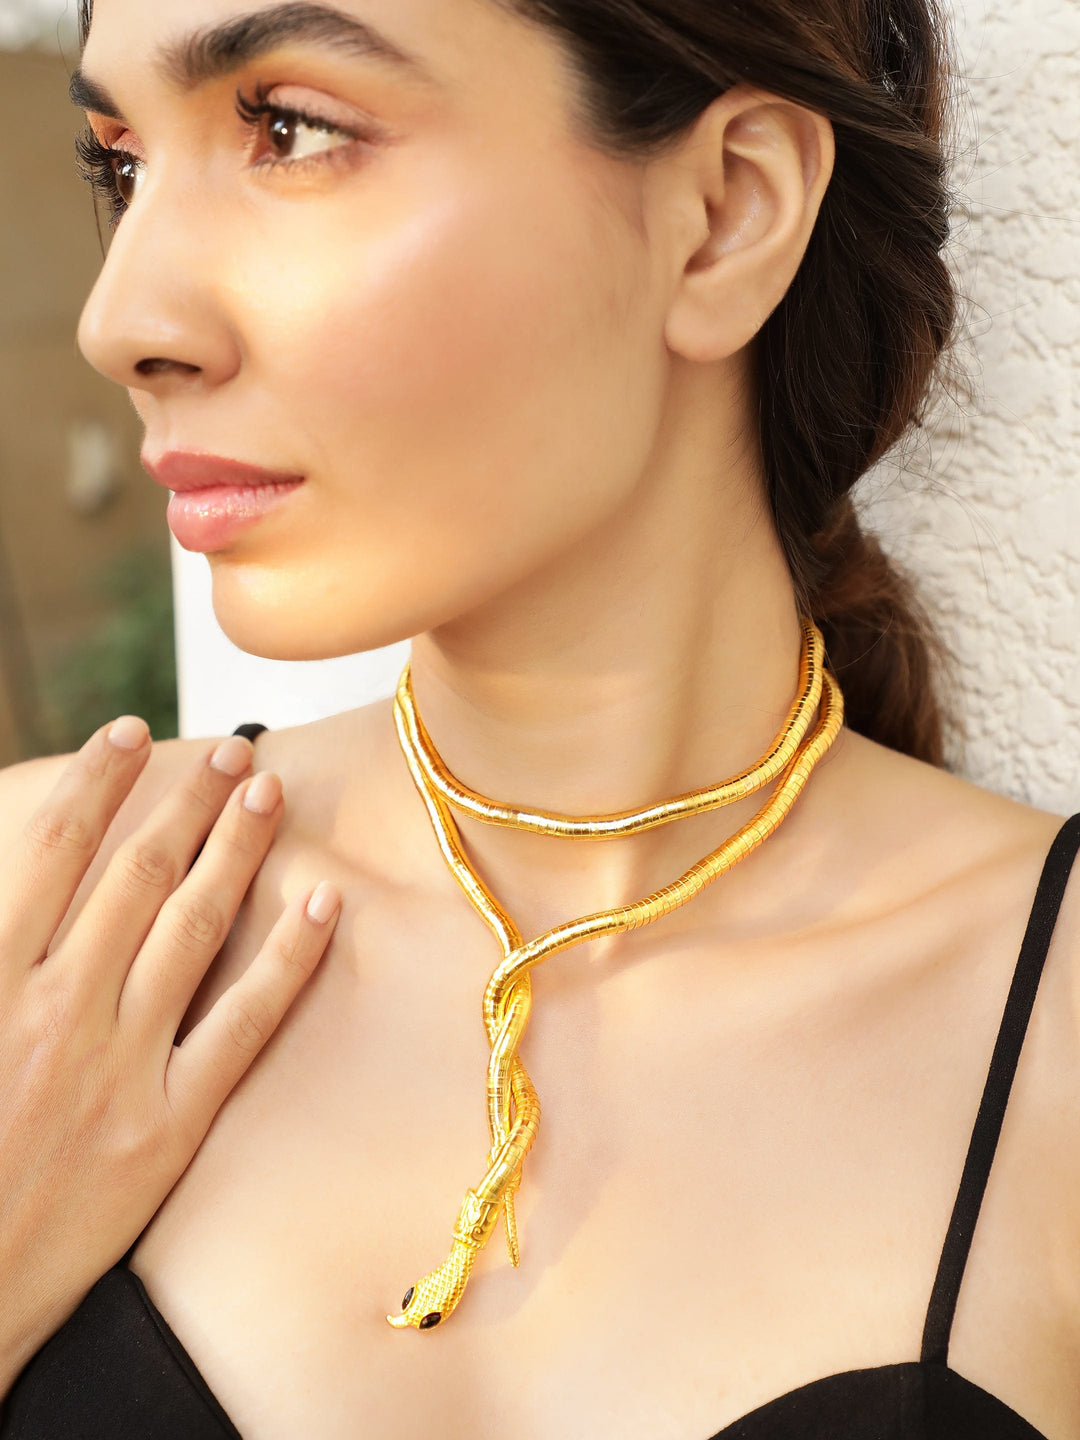 Rubans Voguish Gold-Plated Gilded Snake Pendant Necklace Necklace and Chains